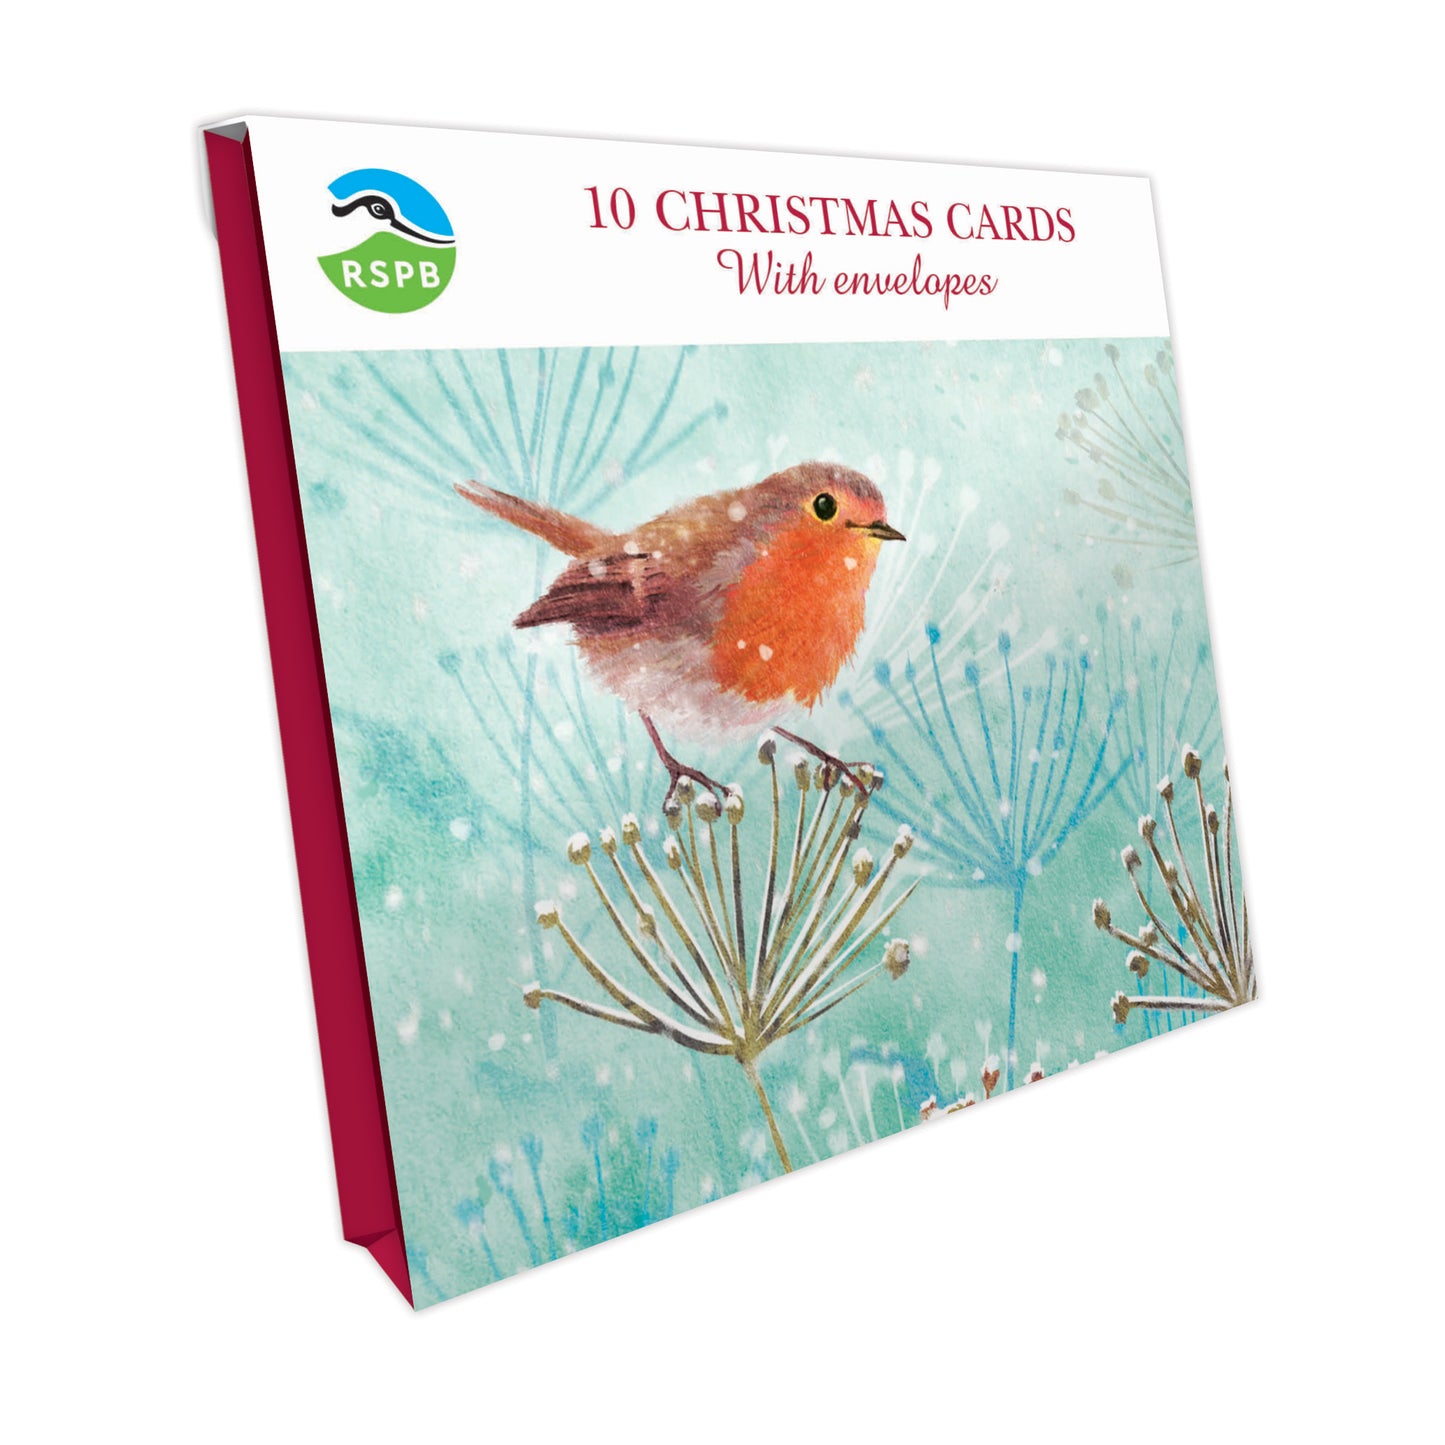 Winter Robin - RSPB Small Square Christmas 10 Card Pack